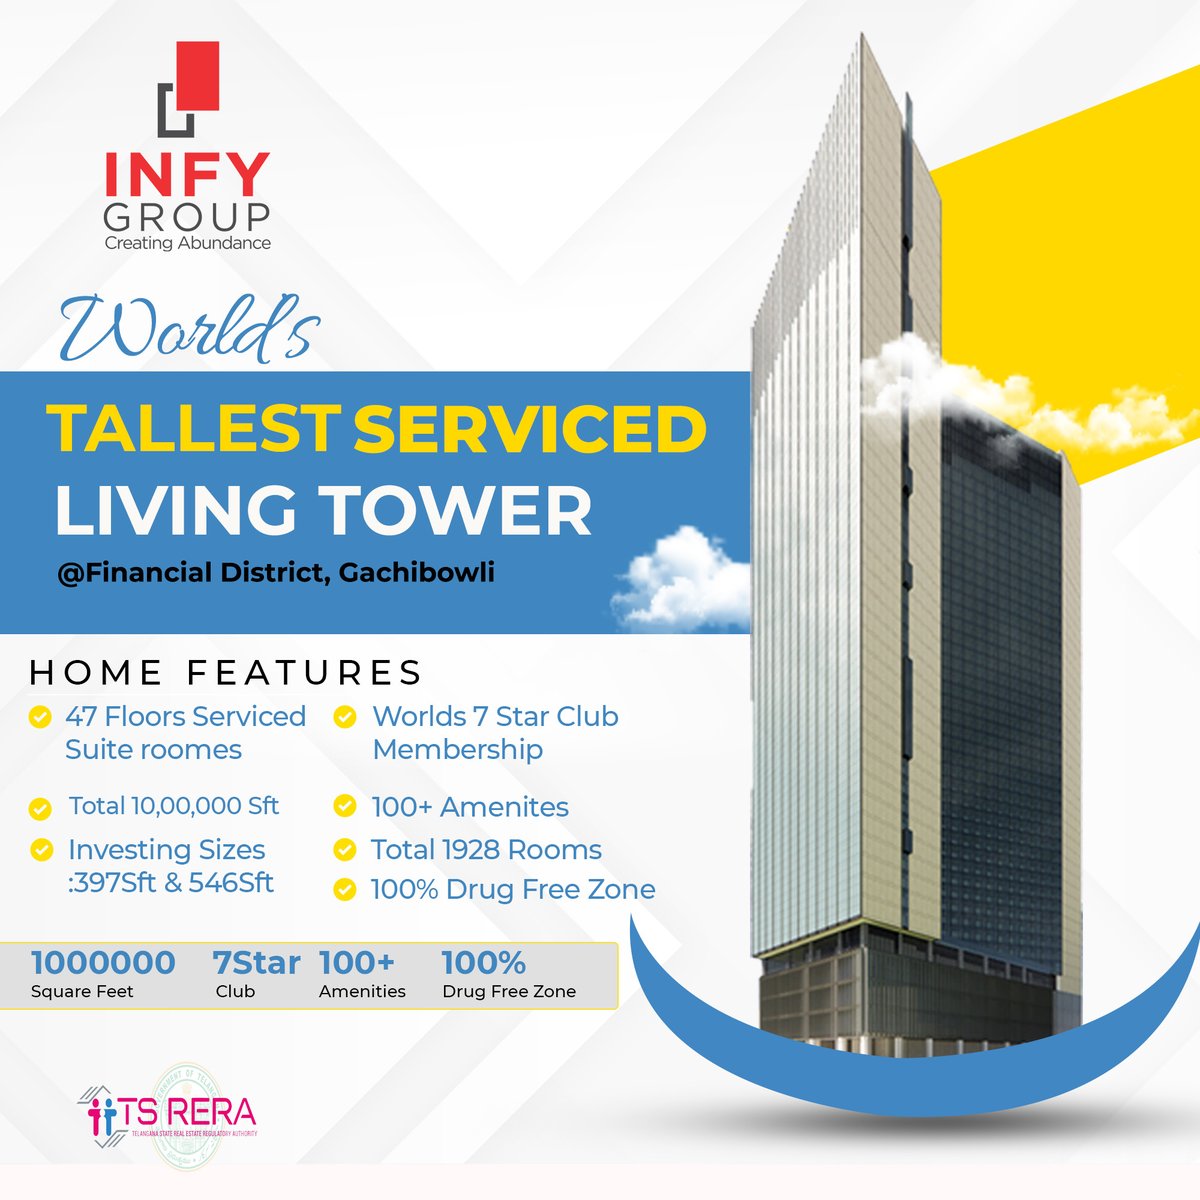 Do you know...?
worlds tallest serviced living tower now 
happening in hyderabad 

#hyderabad #realestate #h1 #placesbyhydeparkdevelopments #hyderabadbusiness #explorepage✨ #coliving #hyderabadhomes #hyderabadhotels #realestateinvesting #investing #trending